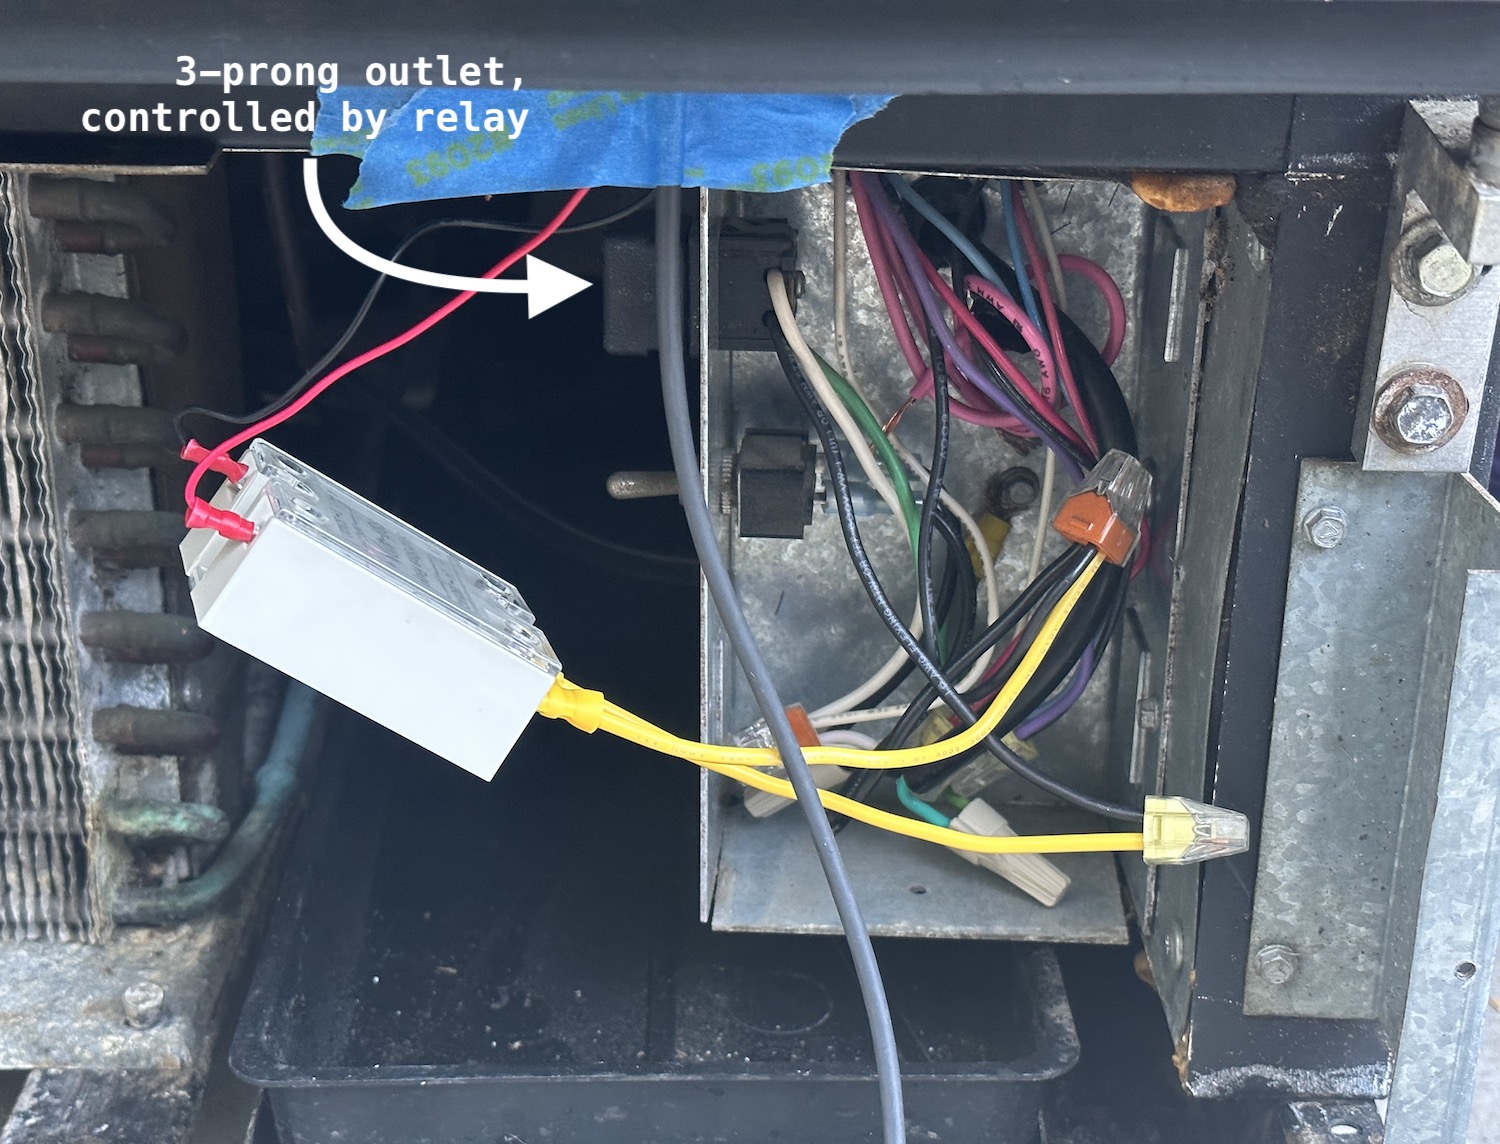 The relay installed near the wiring box for the rest of the fridge components.